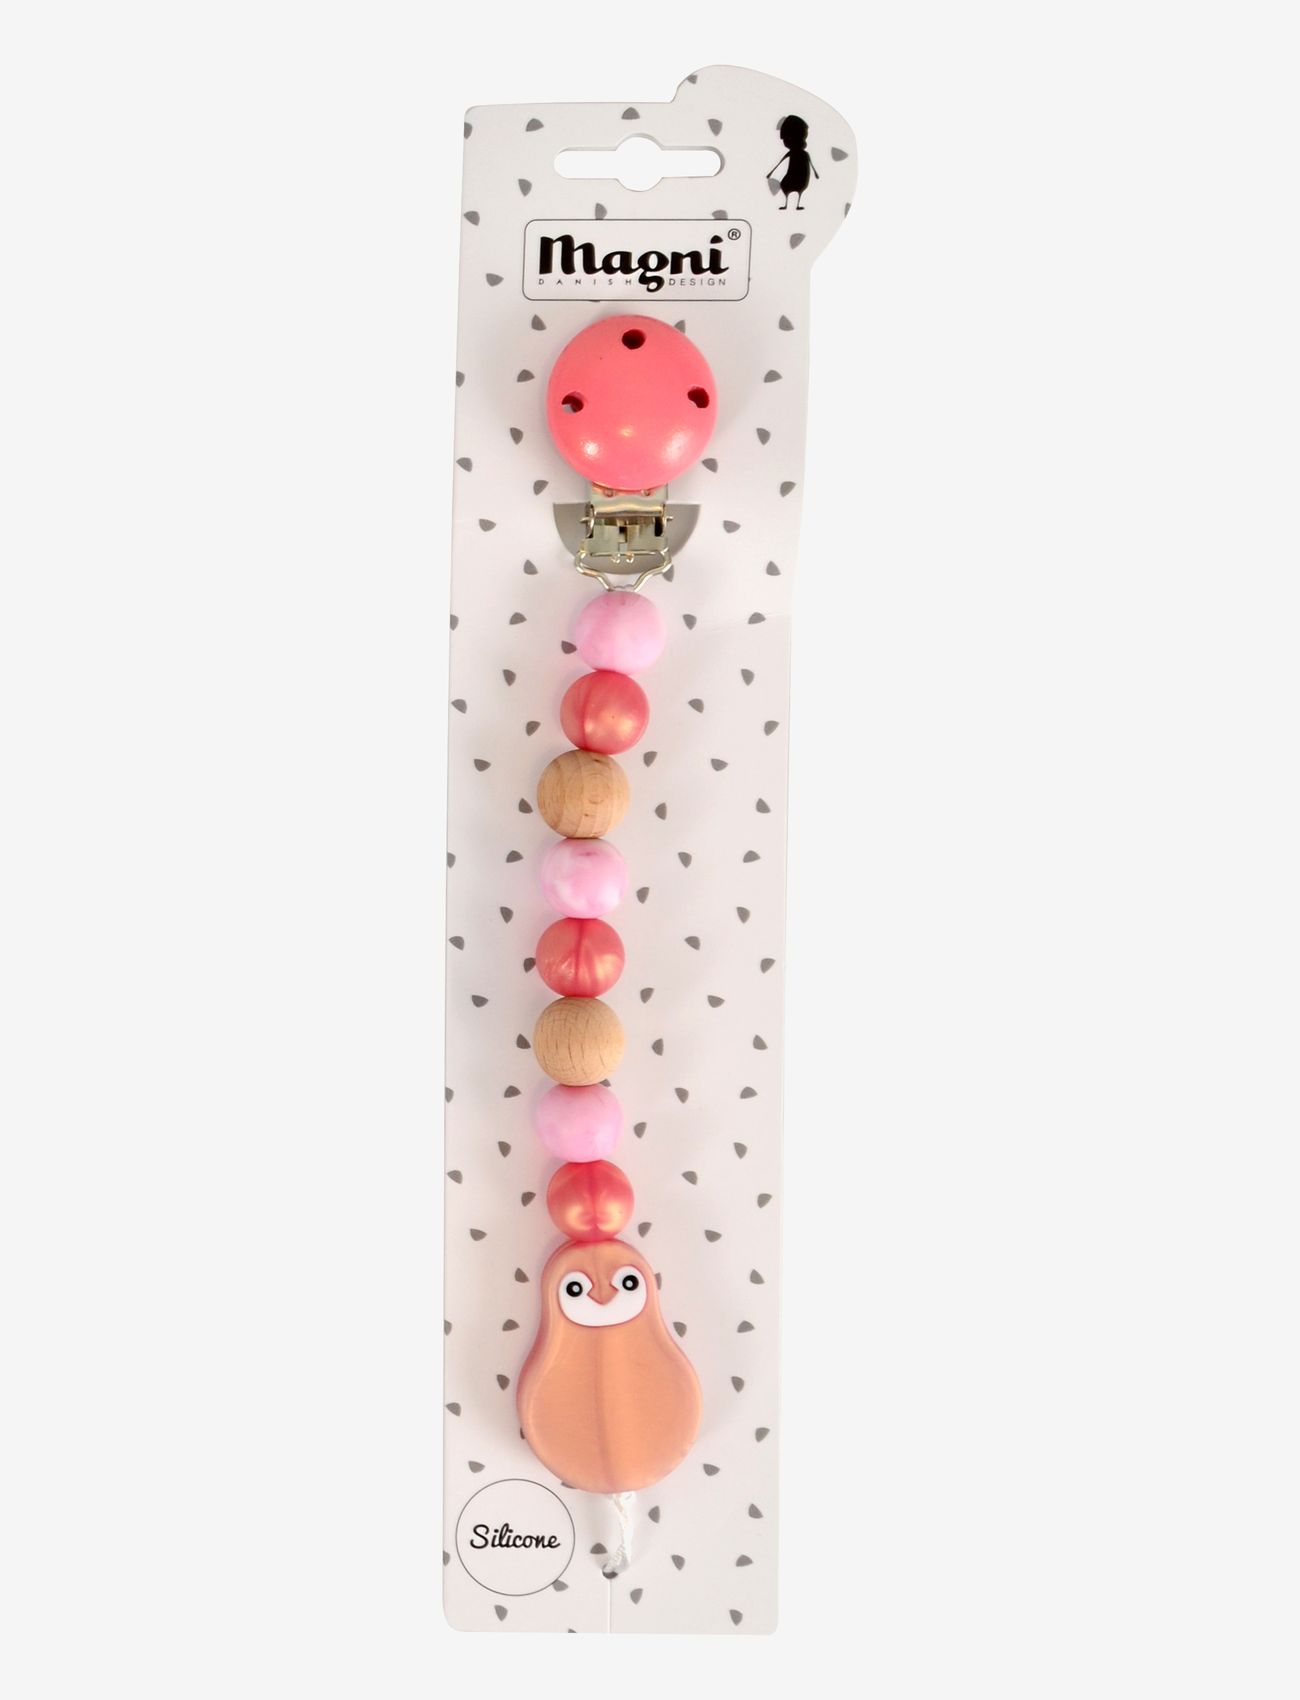 Magni Toys - Soother chain, silicone - Metallic rose gold, Marble pink - suttesnore - metallic rose gold, marble pink, natural - 1